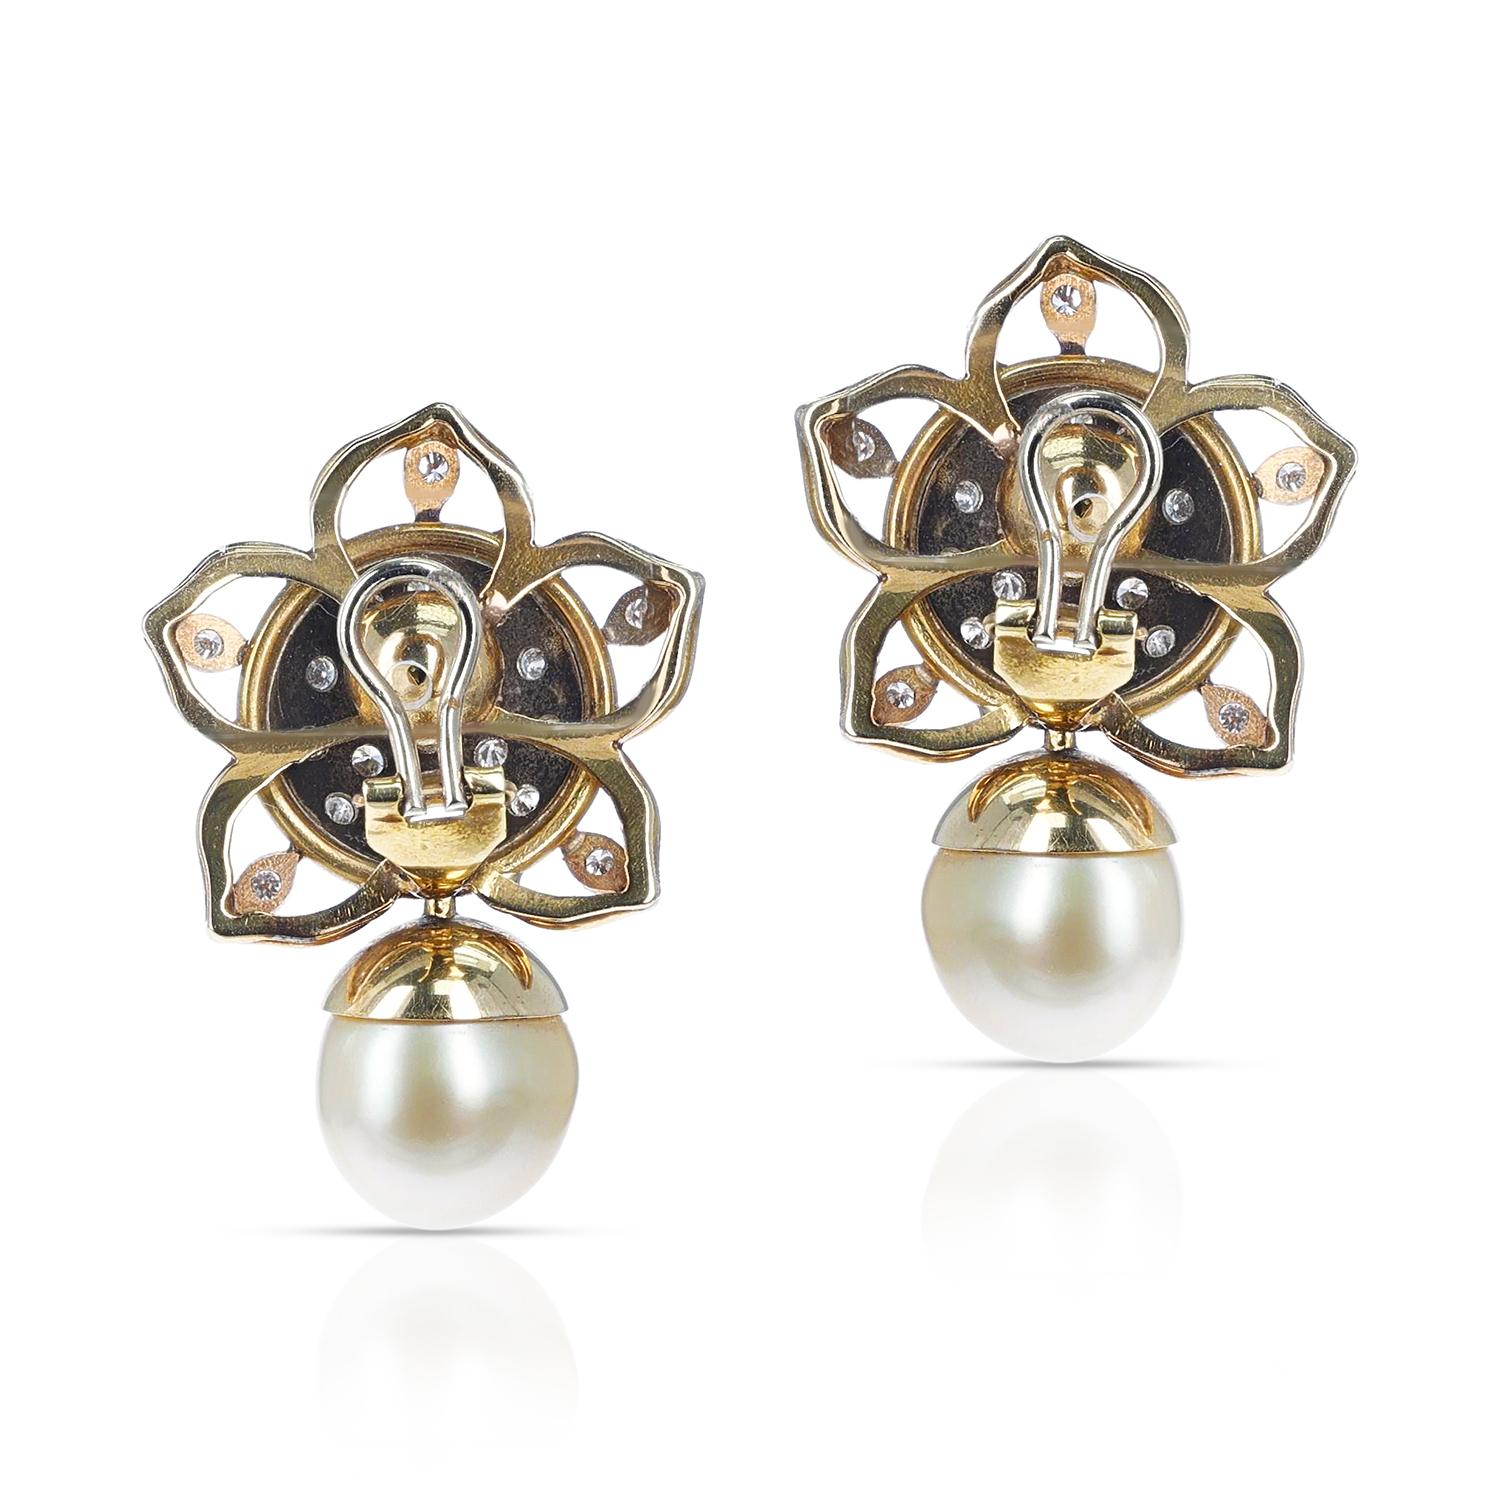 A pair of Pearl and Diamond Earrings. The earrings are clip-ons. Post can be added on, if preferred. The total weight of the earrings is 28.90 grams. The total length is 1.50 inches. 